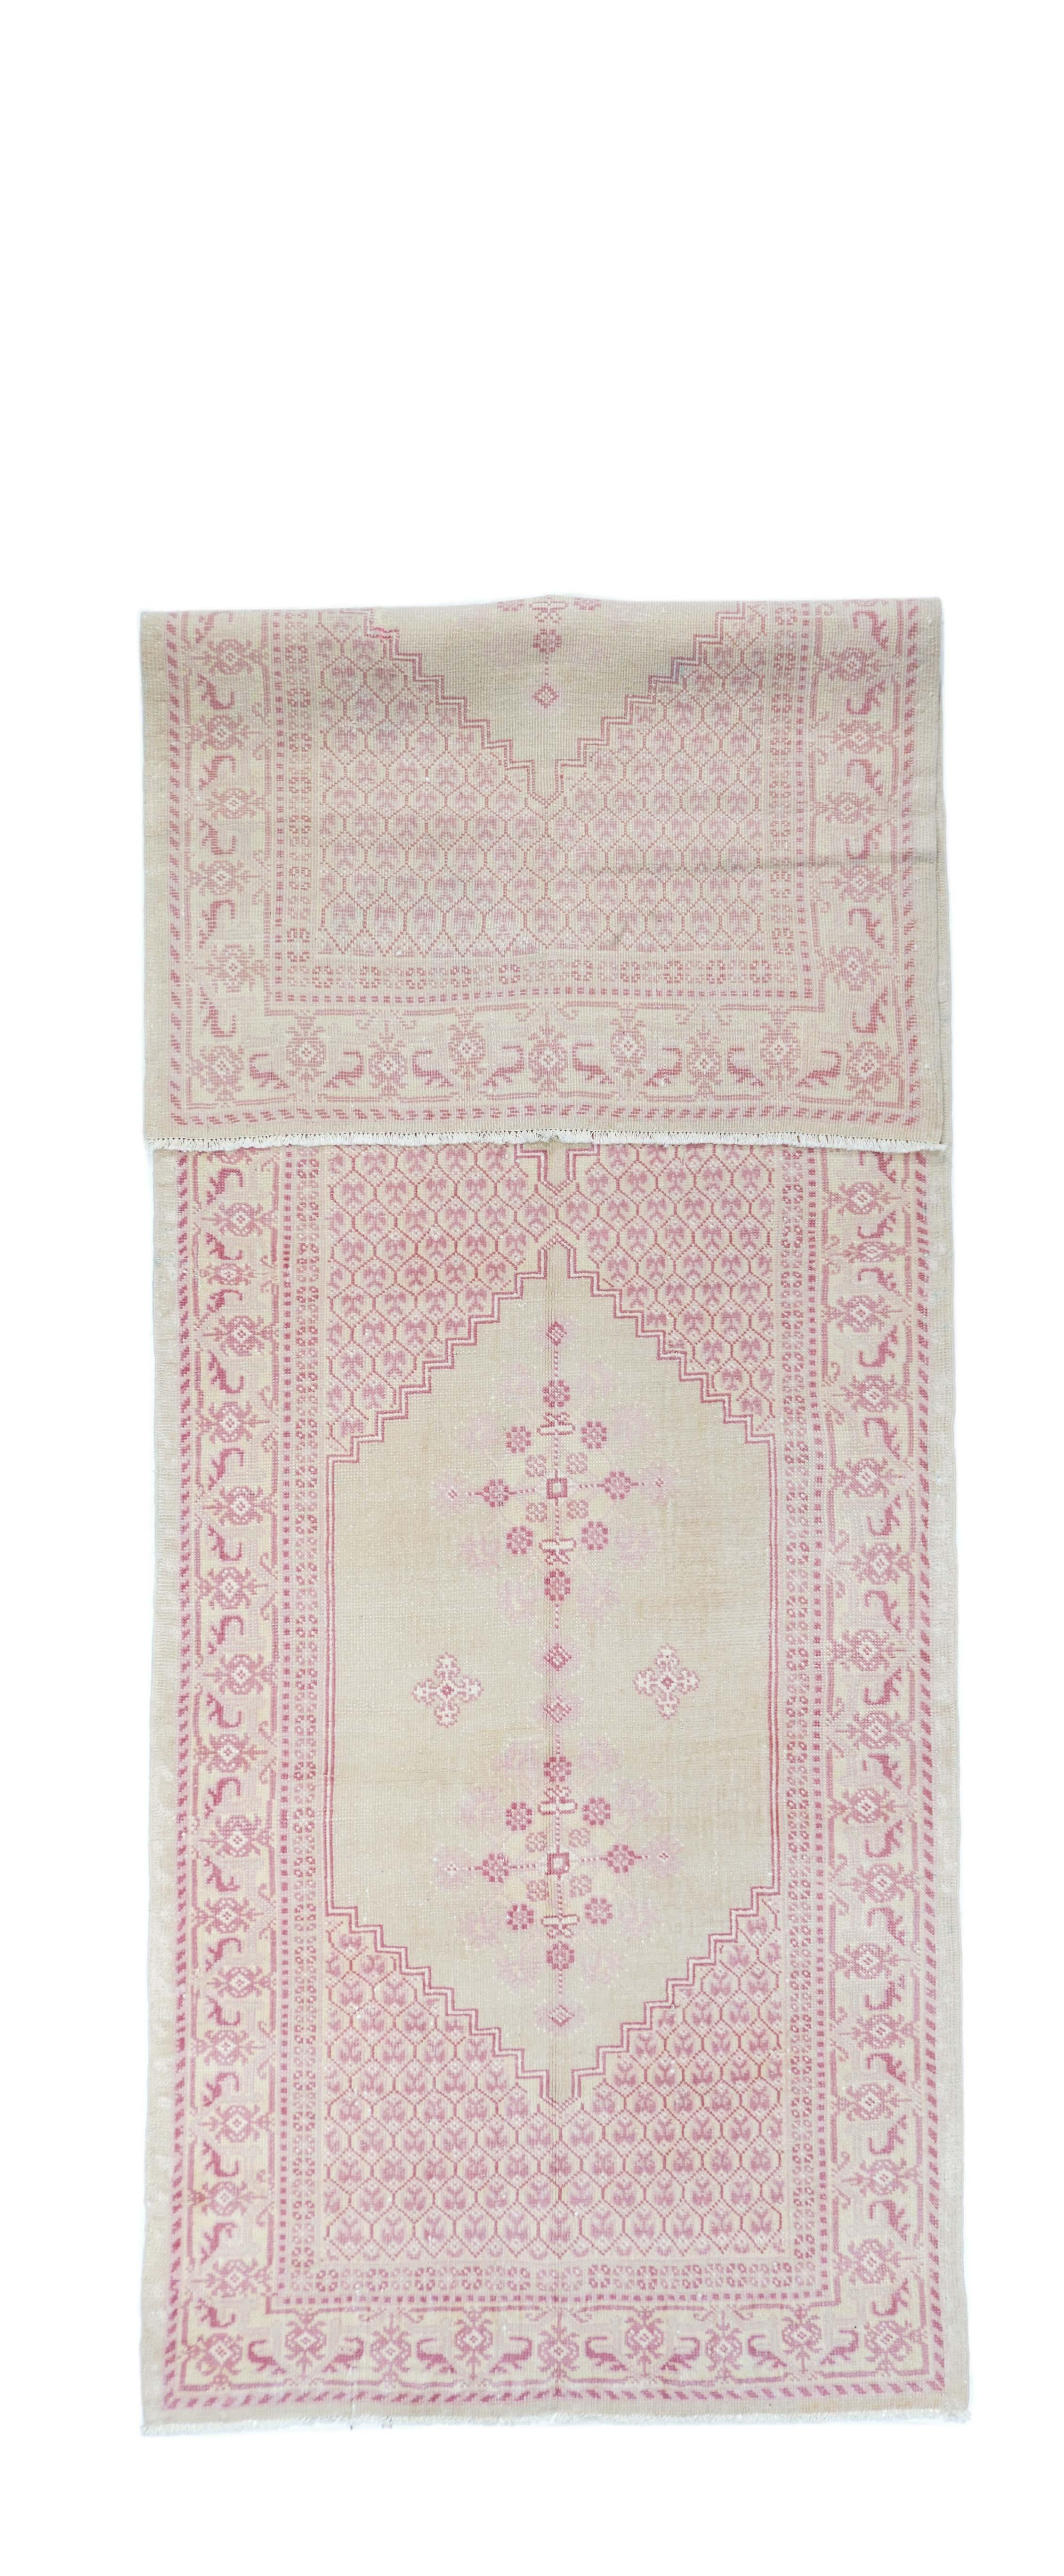 This eastern Turkish vintage town kellegi (long rug) shows a softer palette manifested by two partially stepped open sand-straw hexagons, with honeycomb sections between and at the ends. Two radiating rosette arrays in each panel. Sand border with